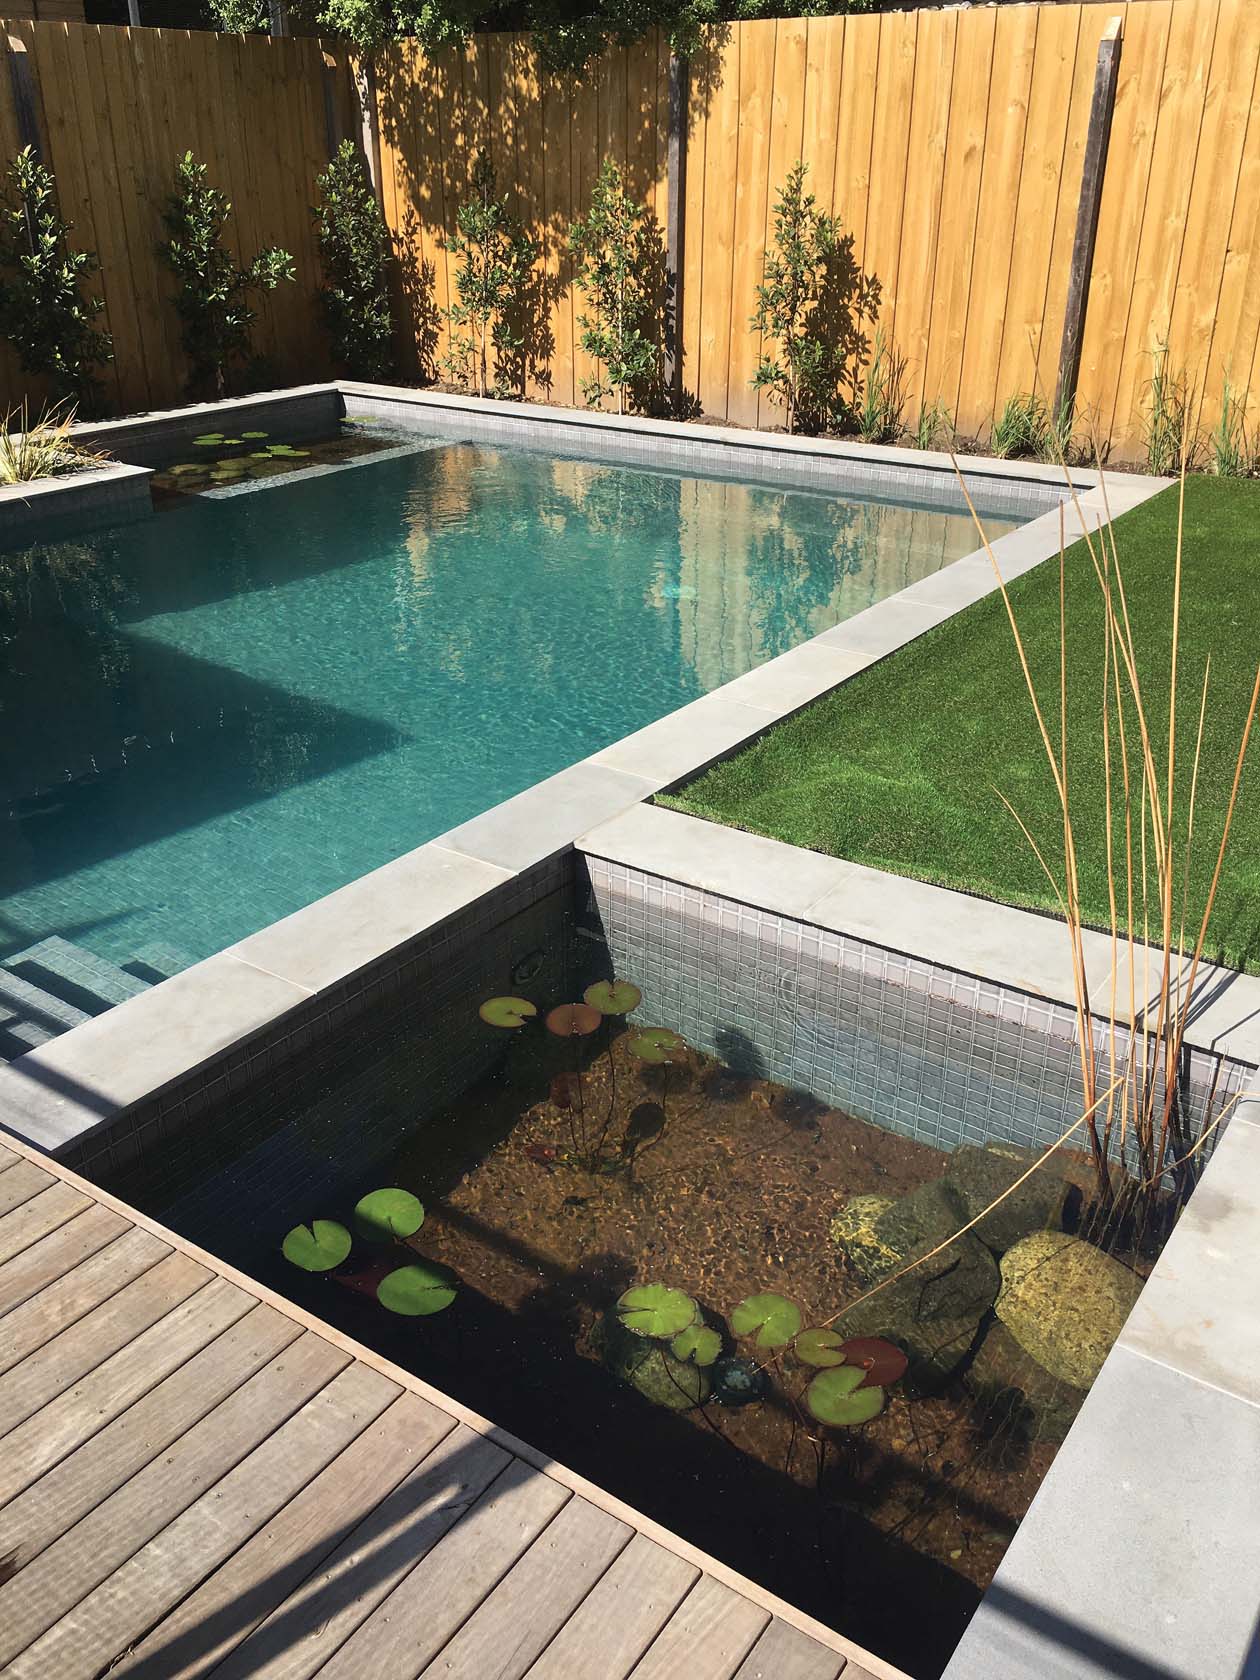 CMC310 Mid Grey fully tiled pool